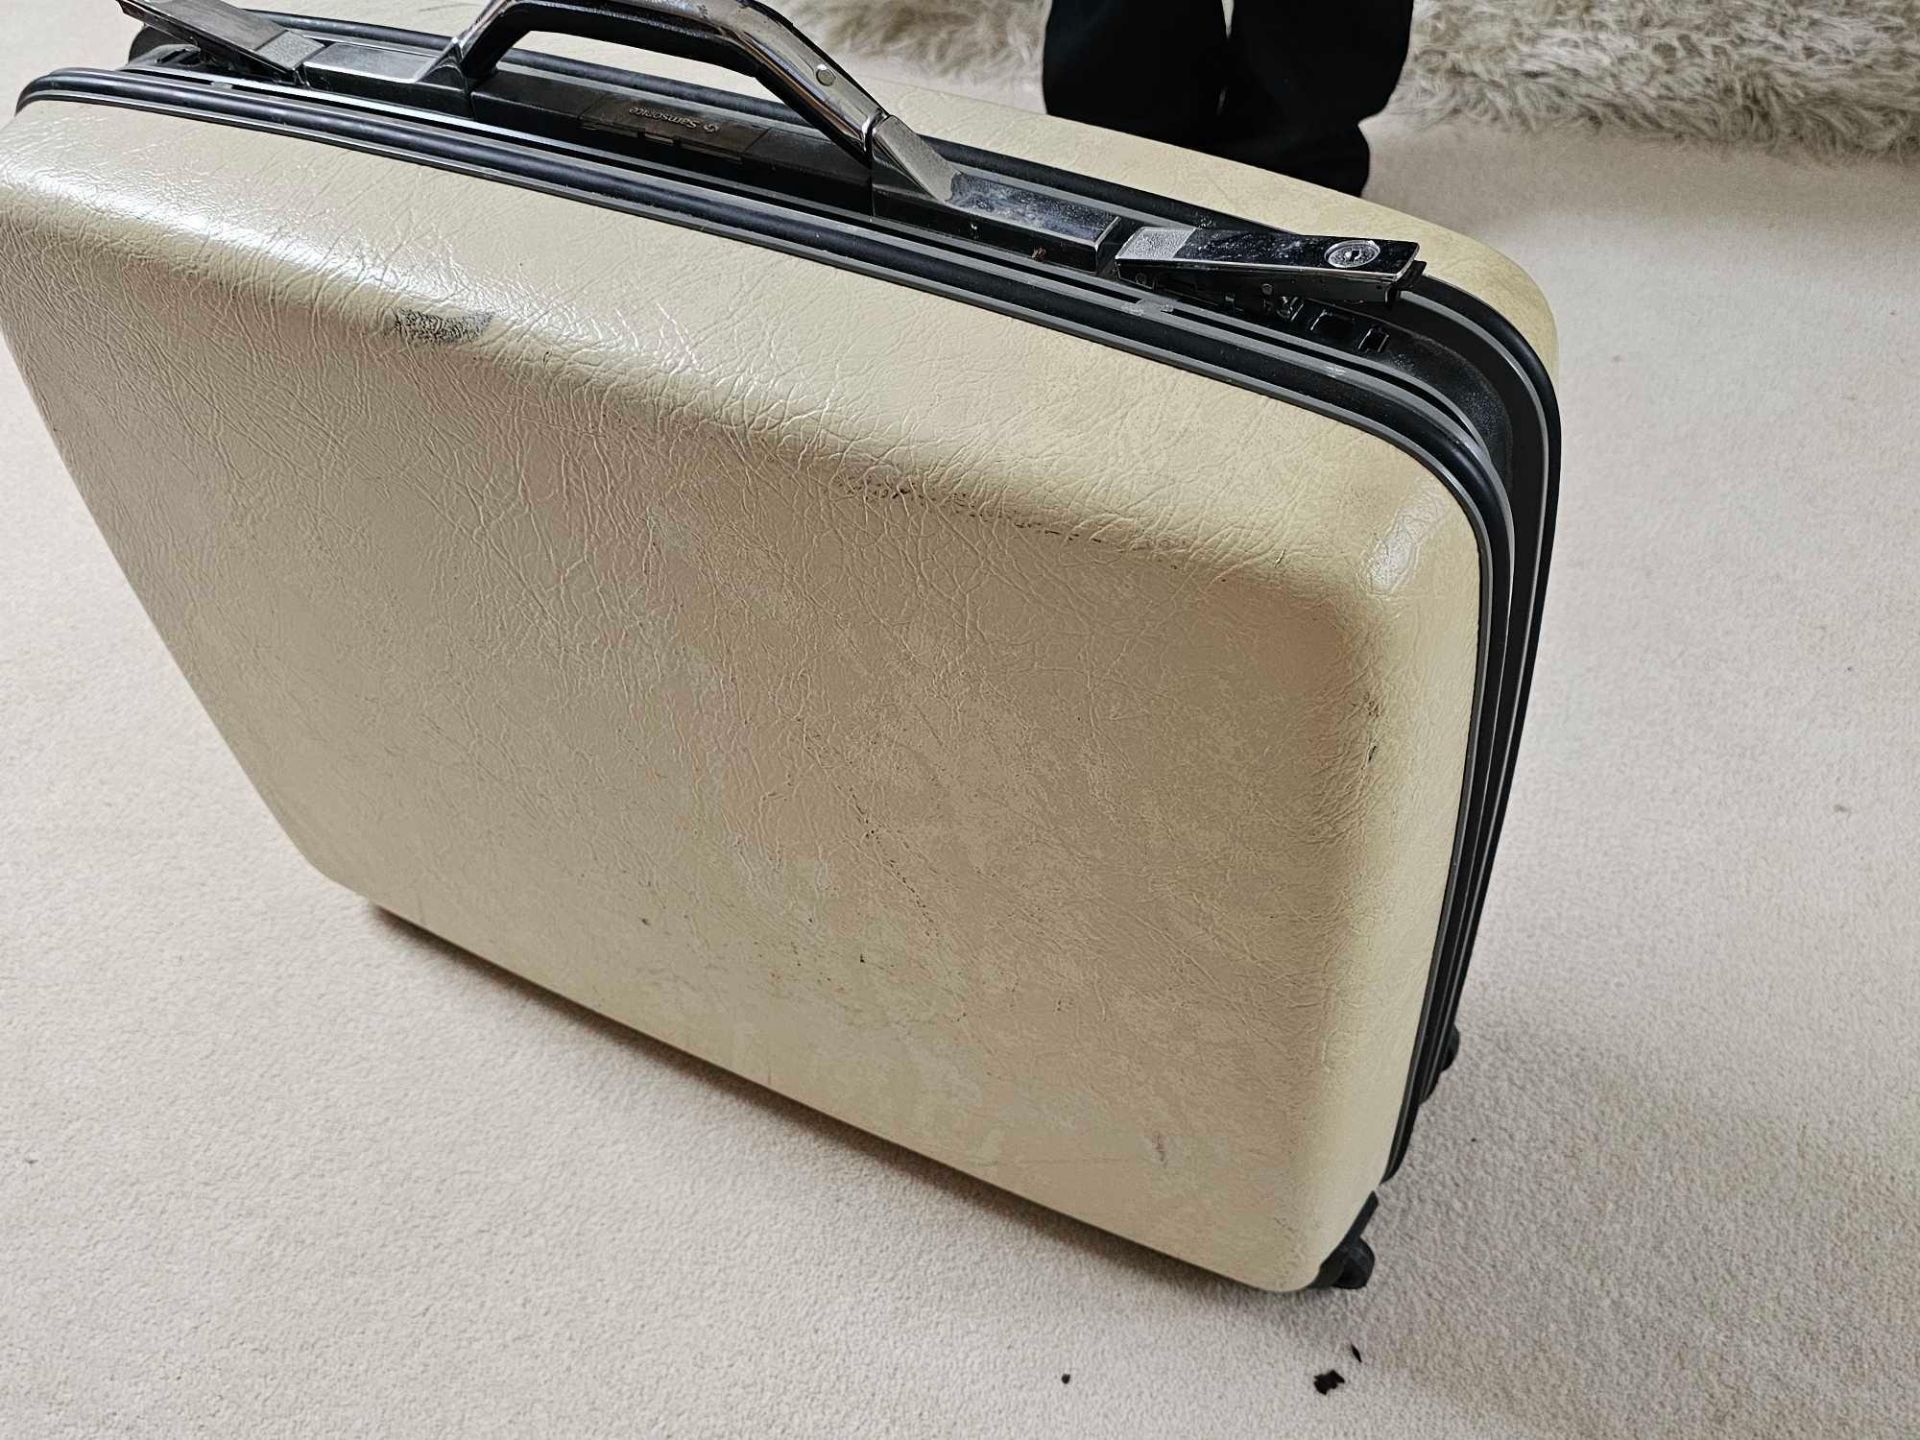 A Vintage 1960s Samsonite Silhouette Hard Shell Luggage Suitcase With Liner Intact - Image 3 of 4